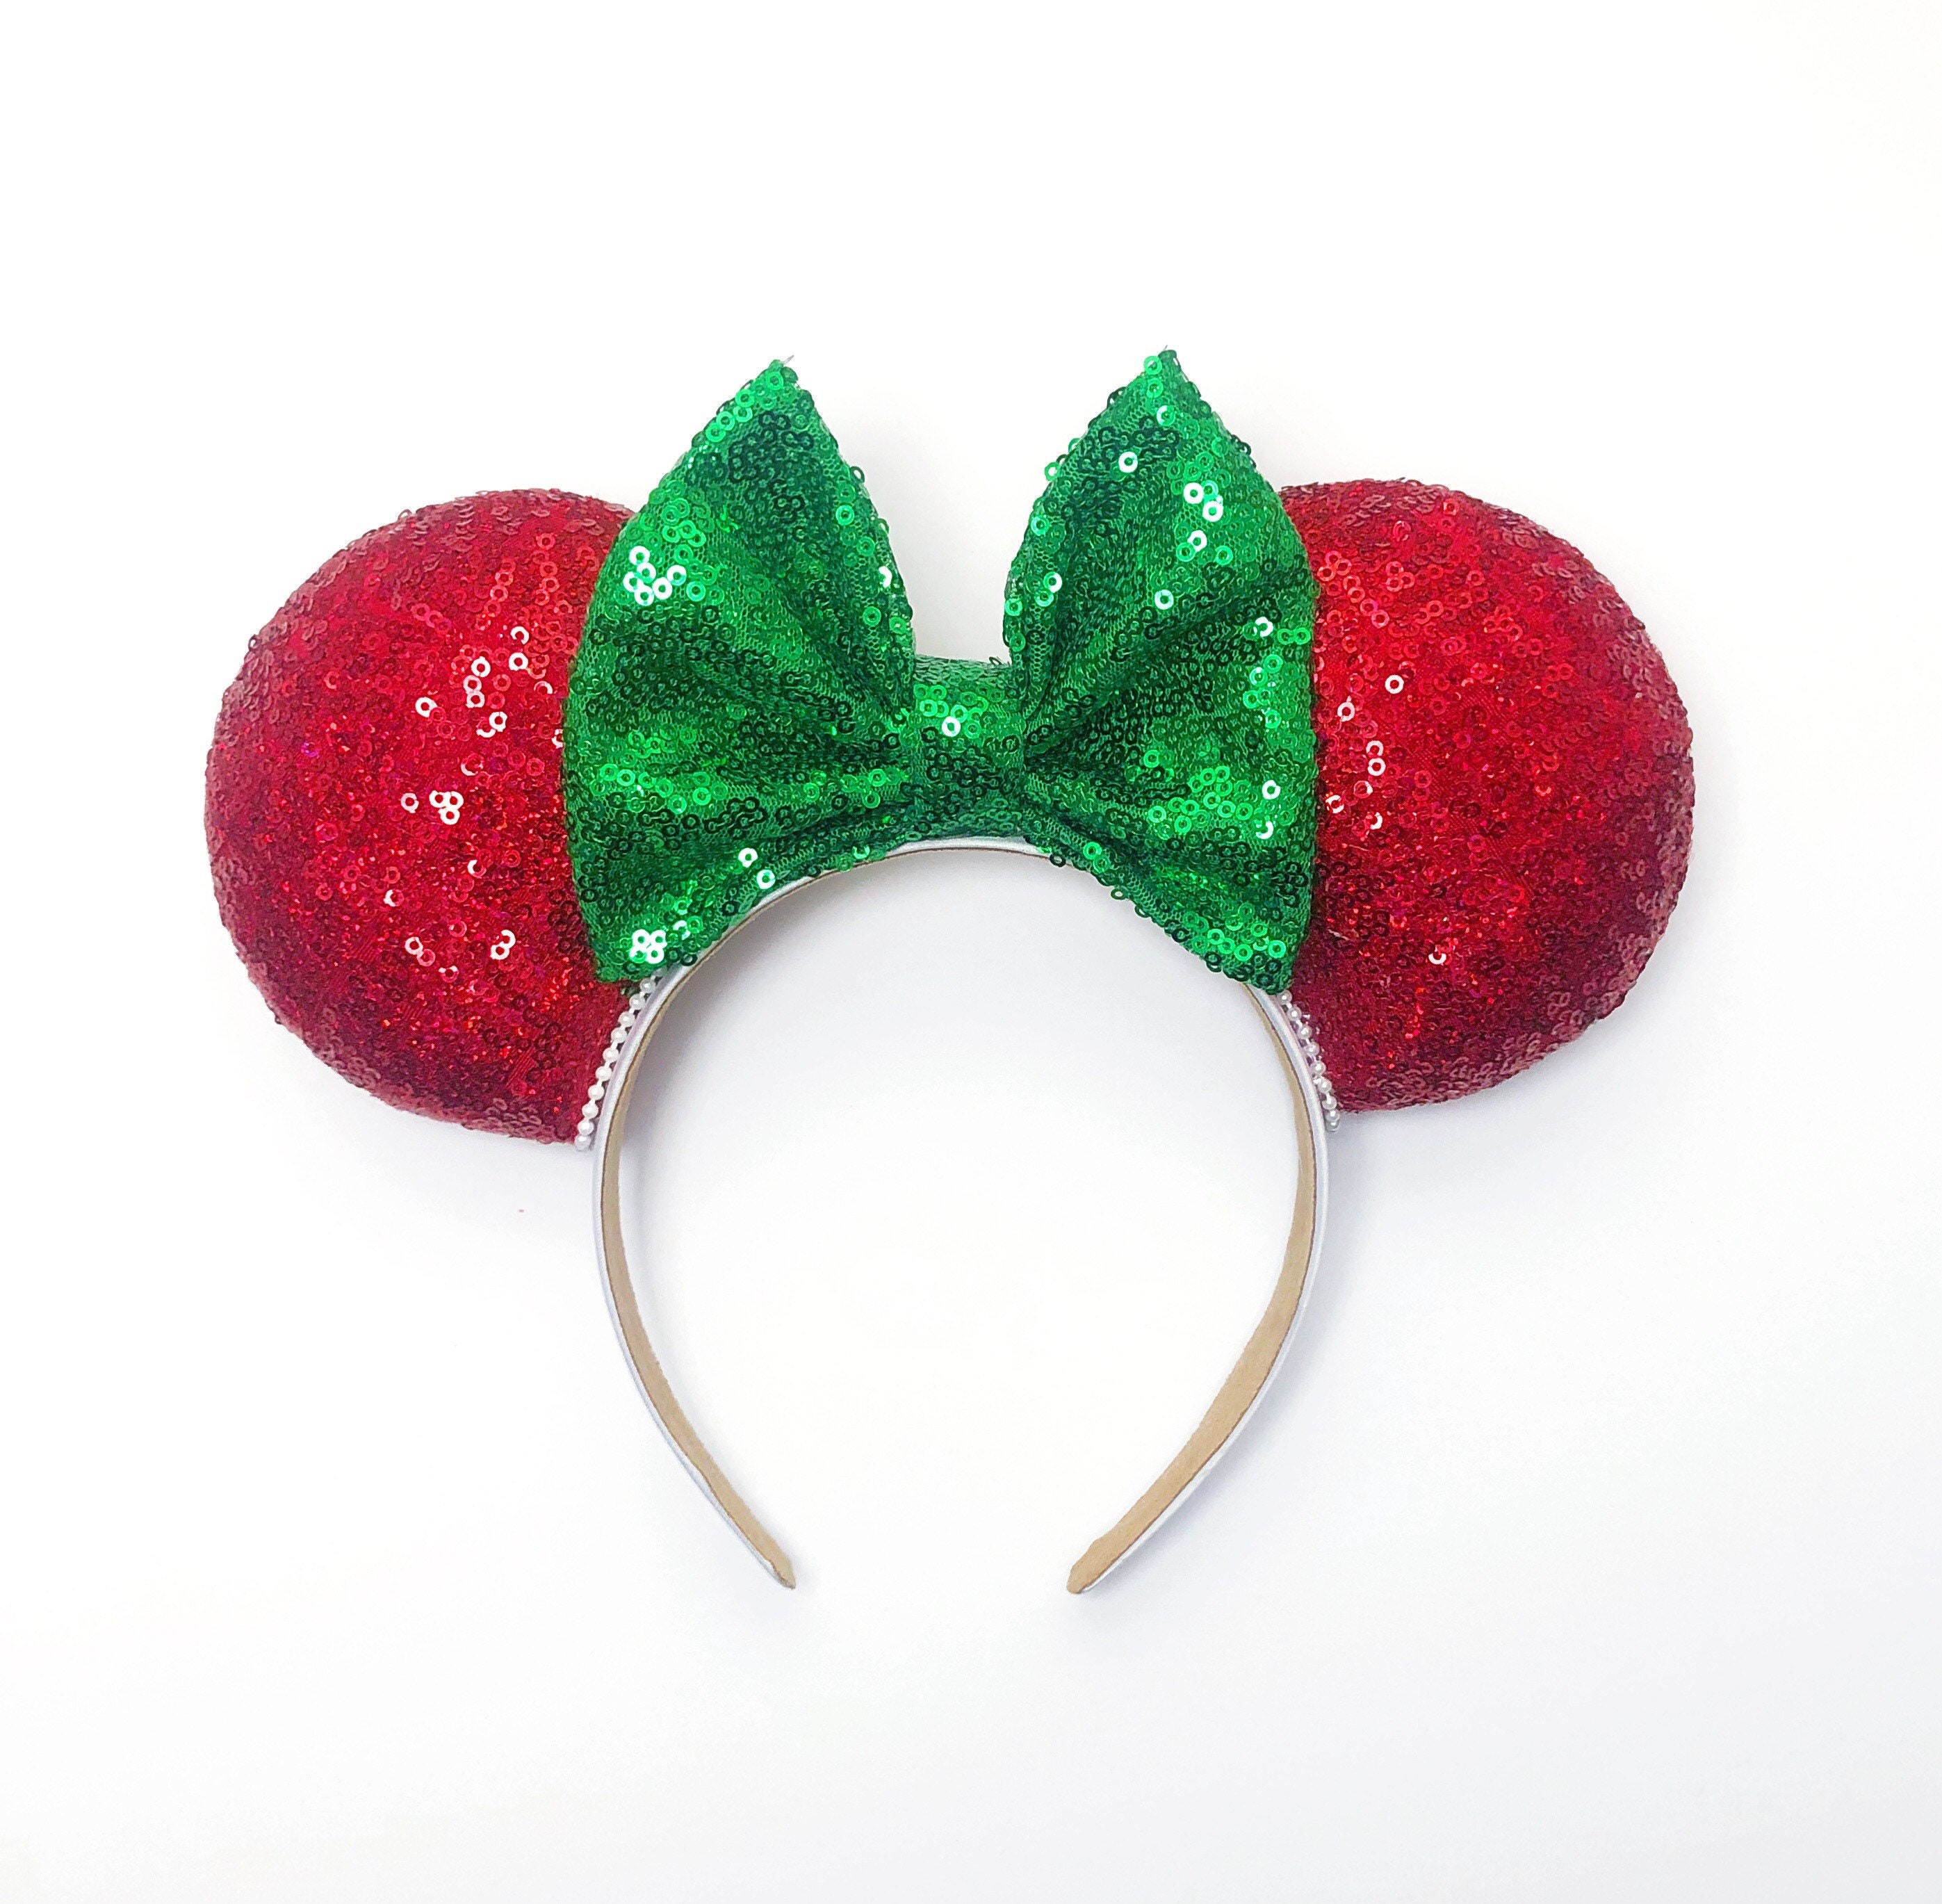 Th hay run out Minnie Mouse Turban - Etsy